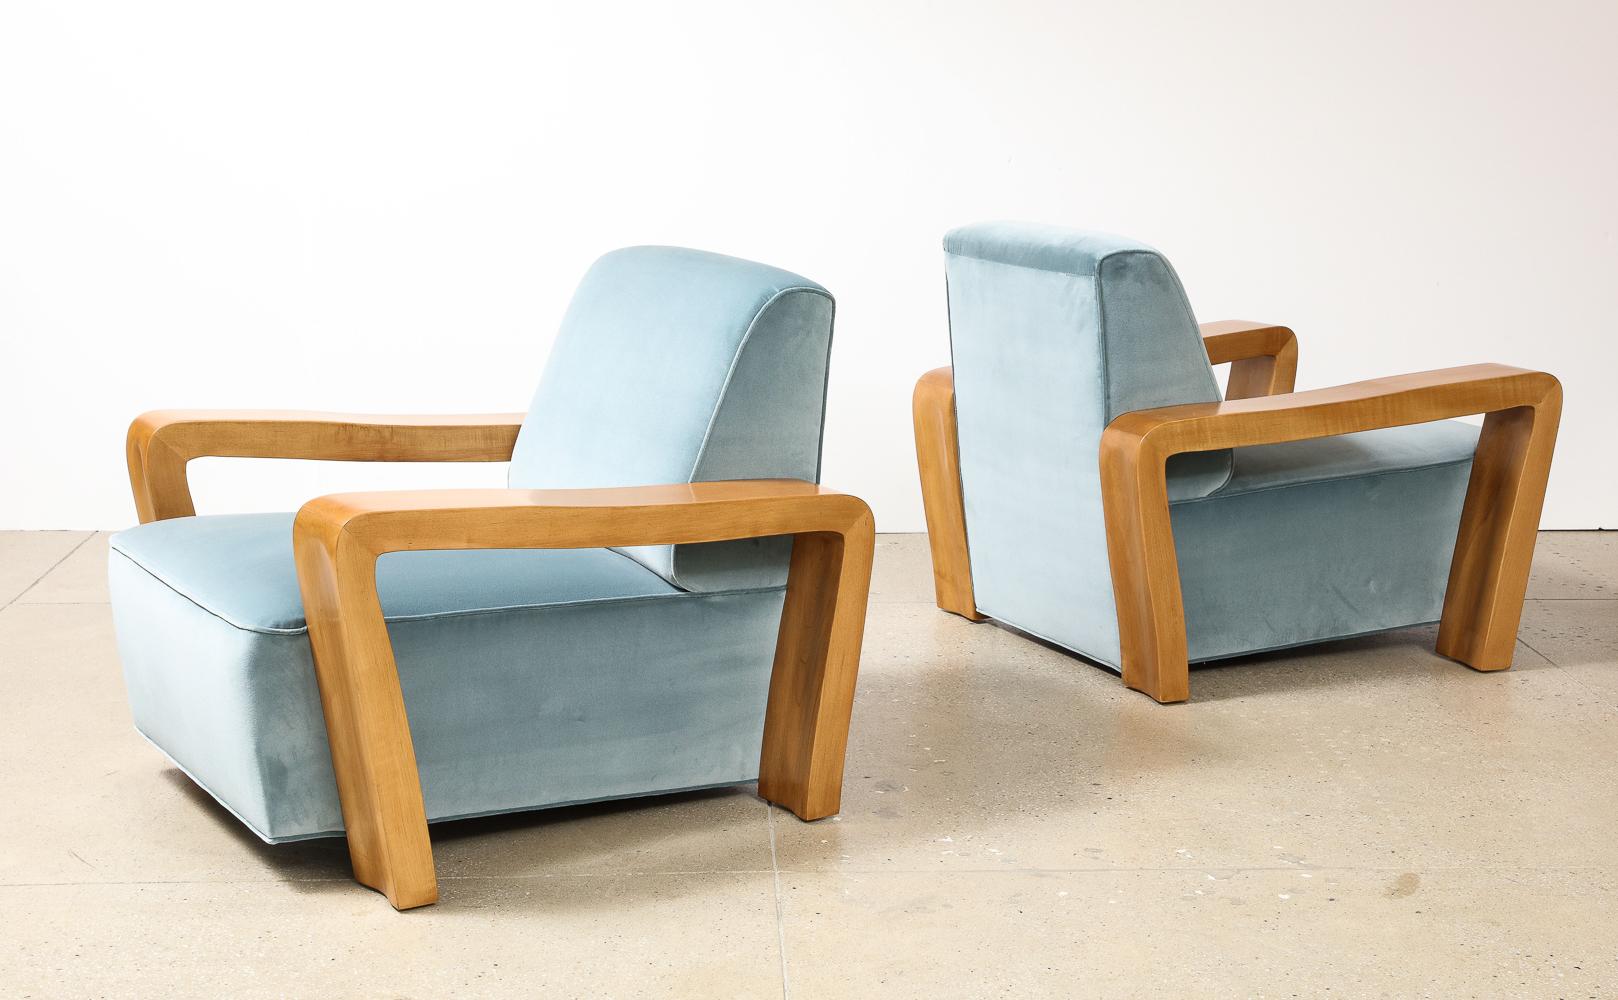 Rare Pair of Club Chairs by Paul László. Maple wood, velvet upholstery. Massively scaled & sculpted side supports of light wood. Deep cushion seats that appear to float just above the floor. A rare model.